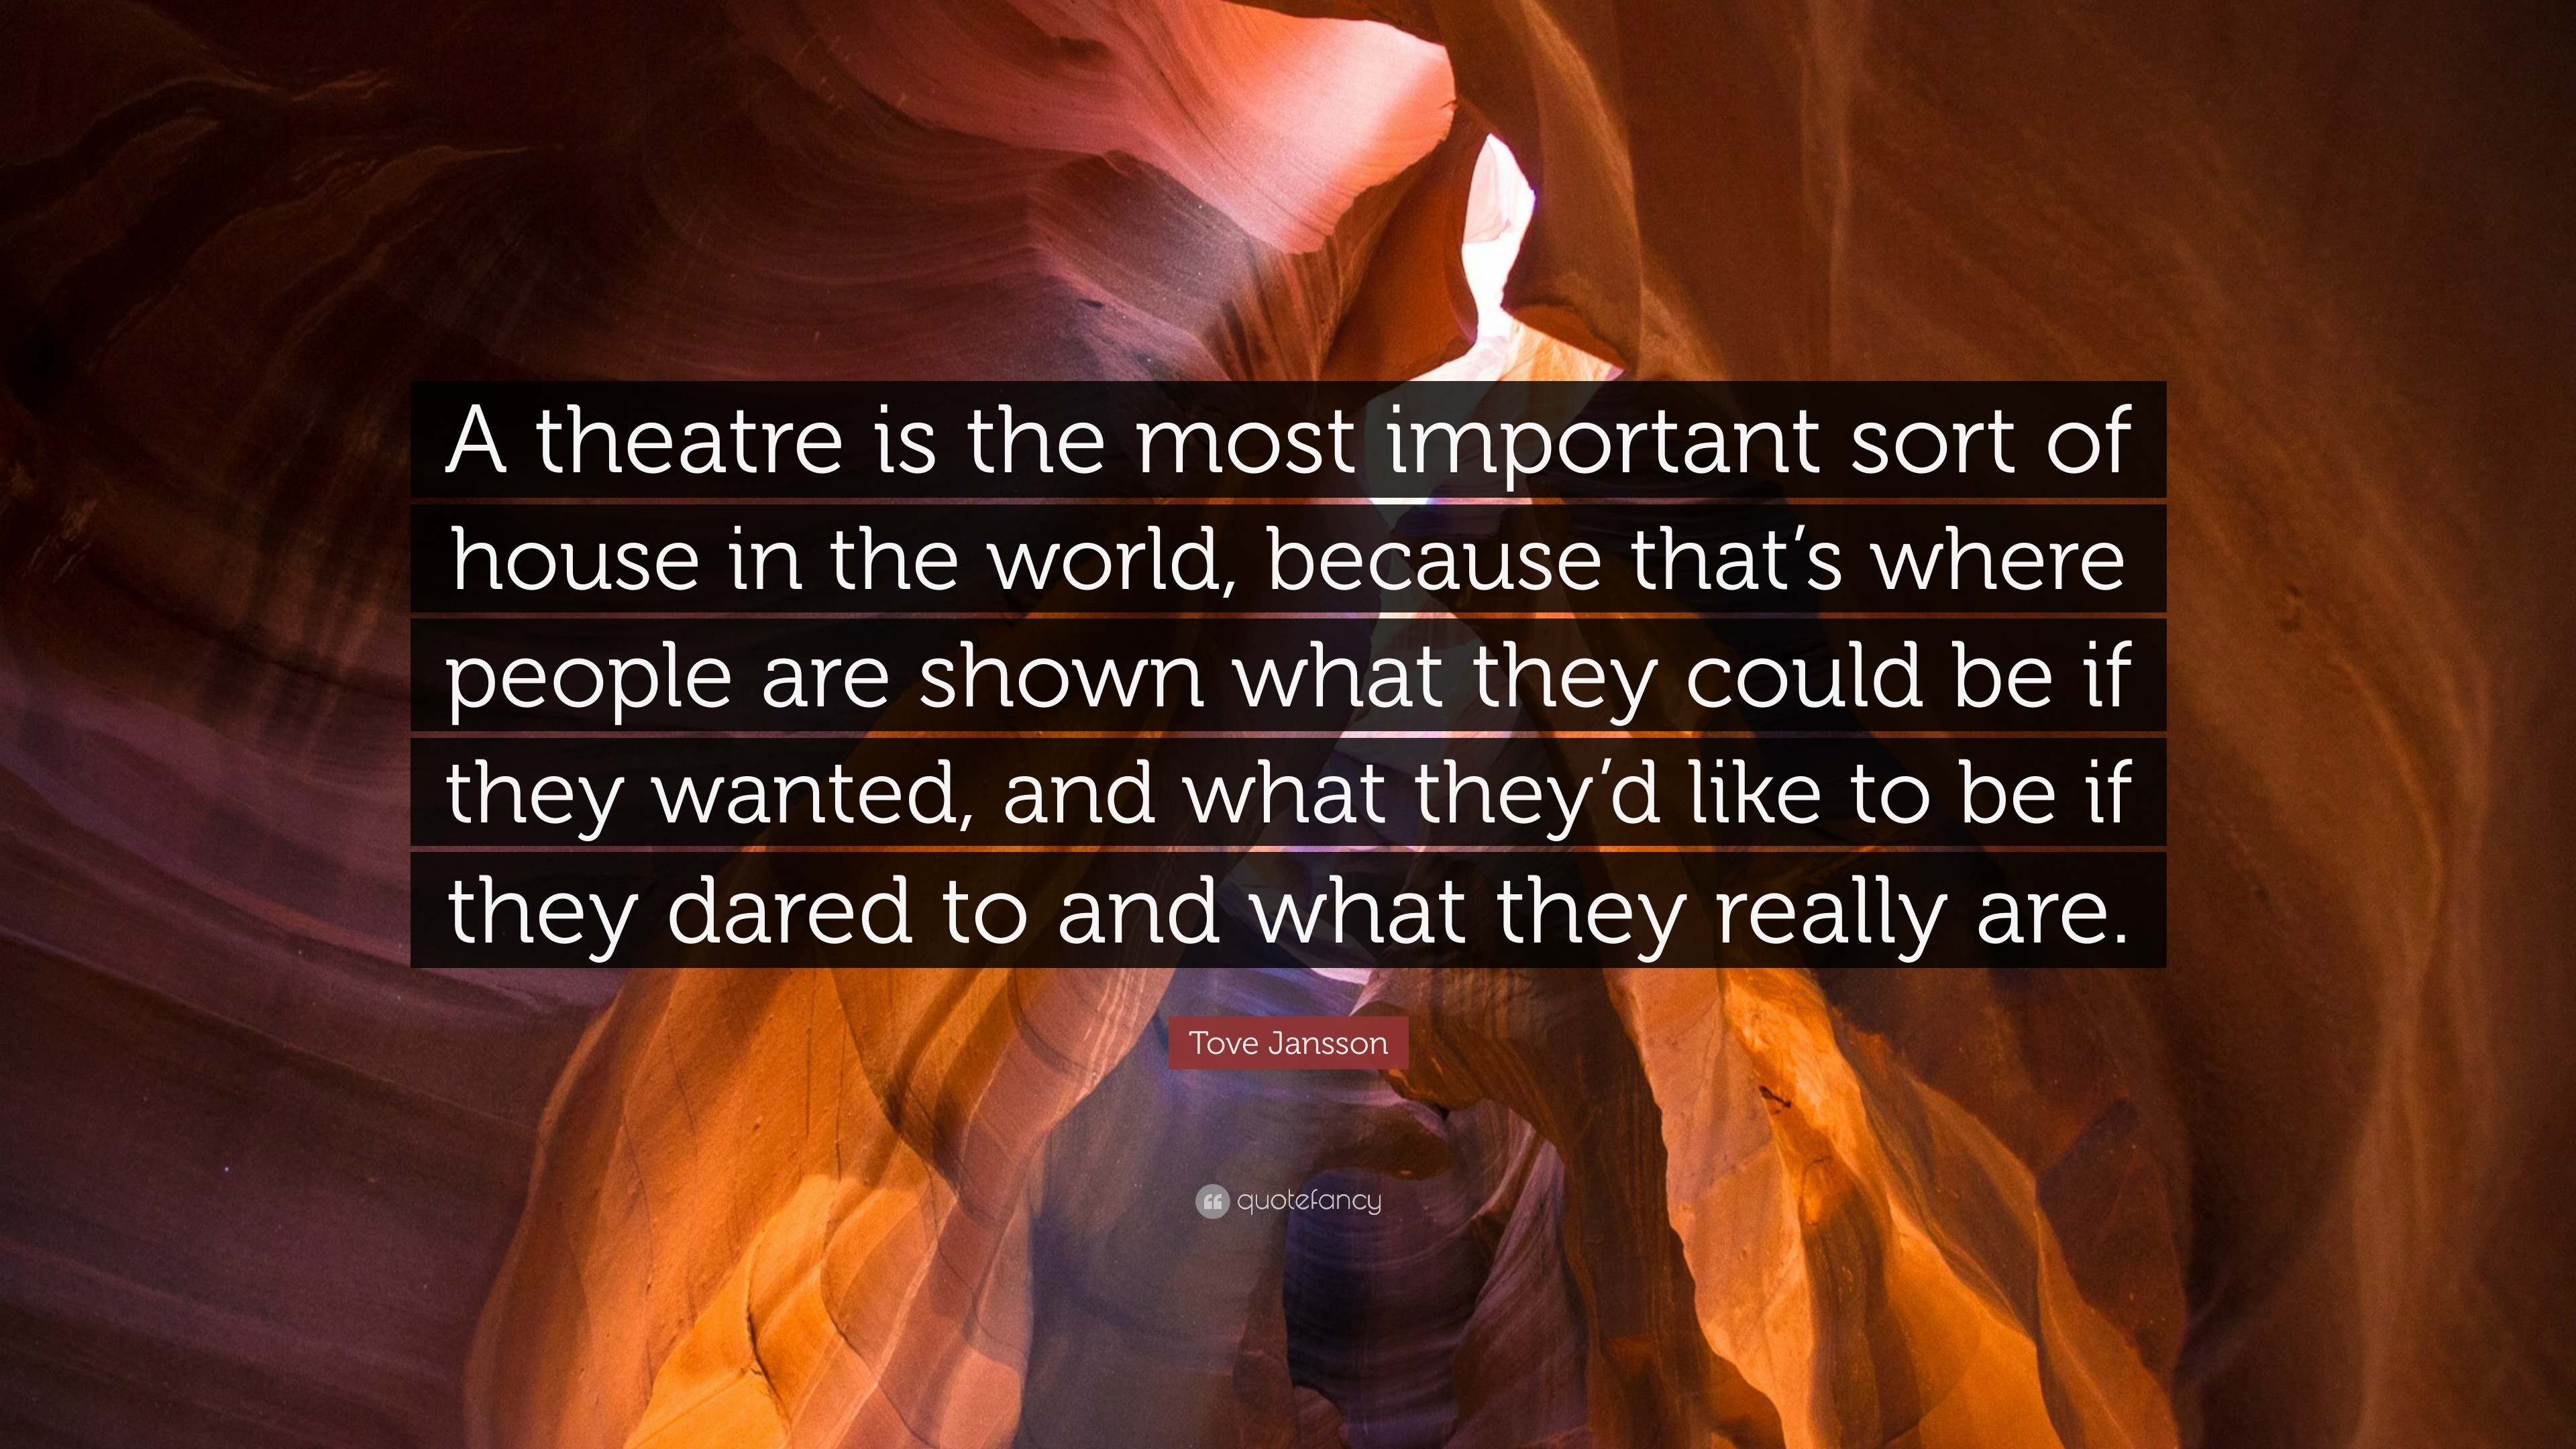 Tove Jansson Quote: “A theatre is the most important sort of house in ...